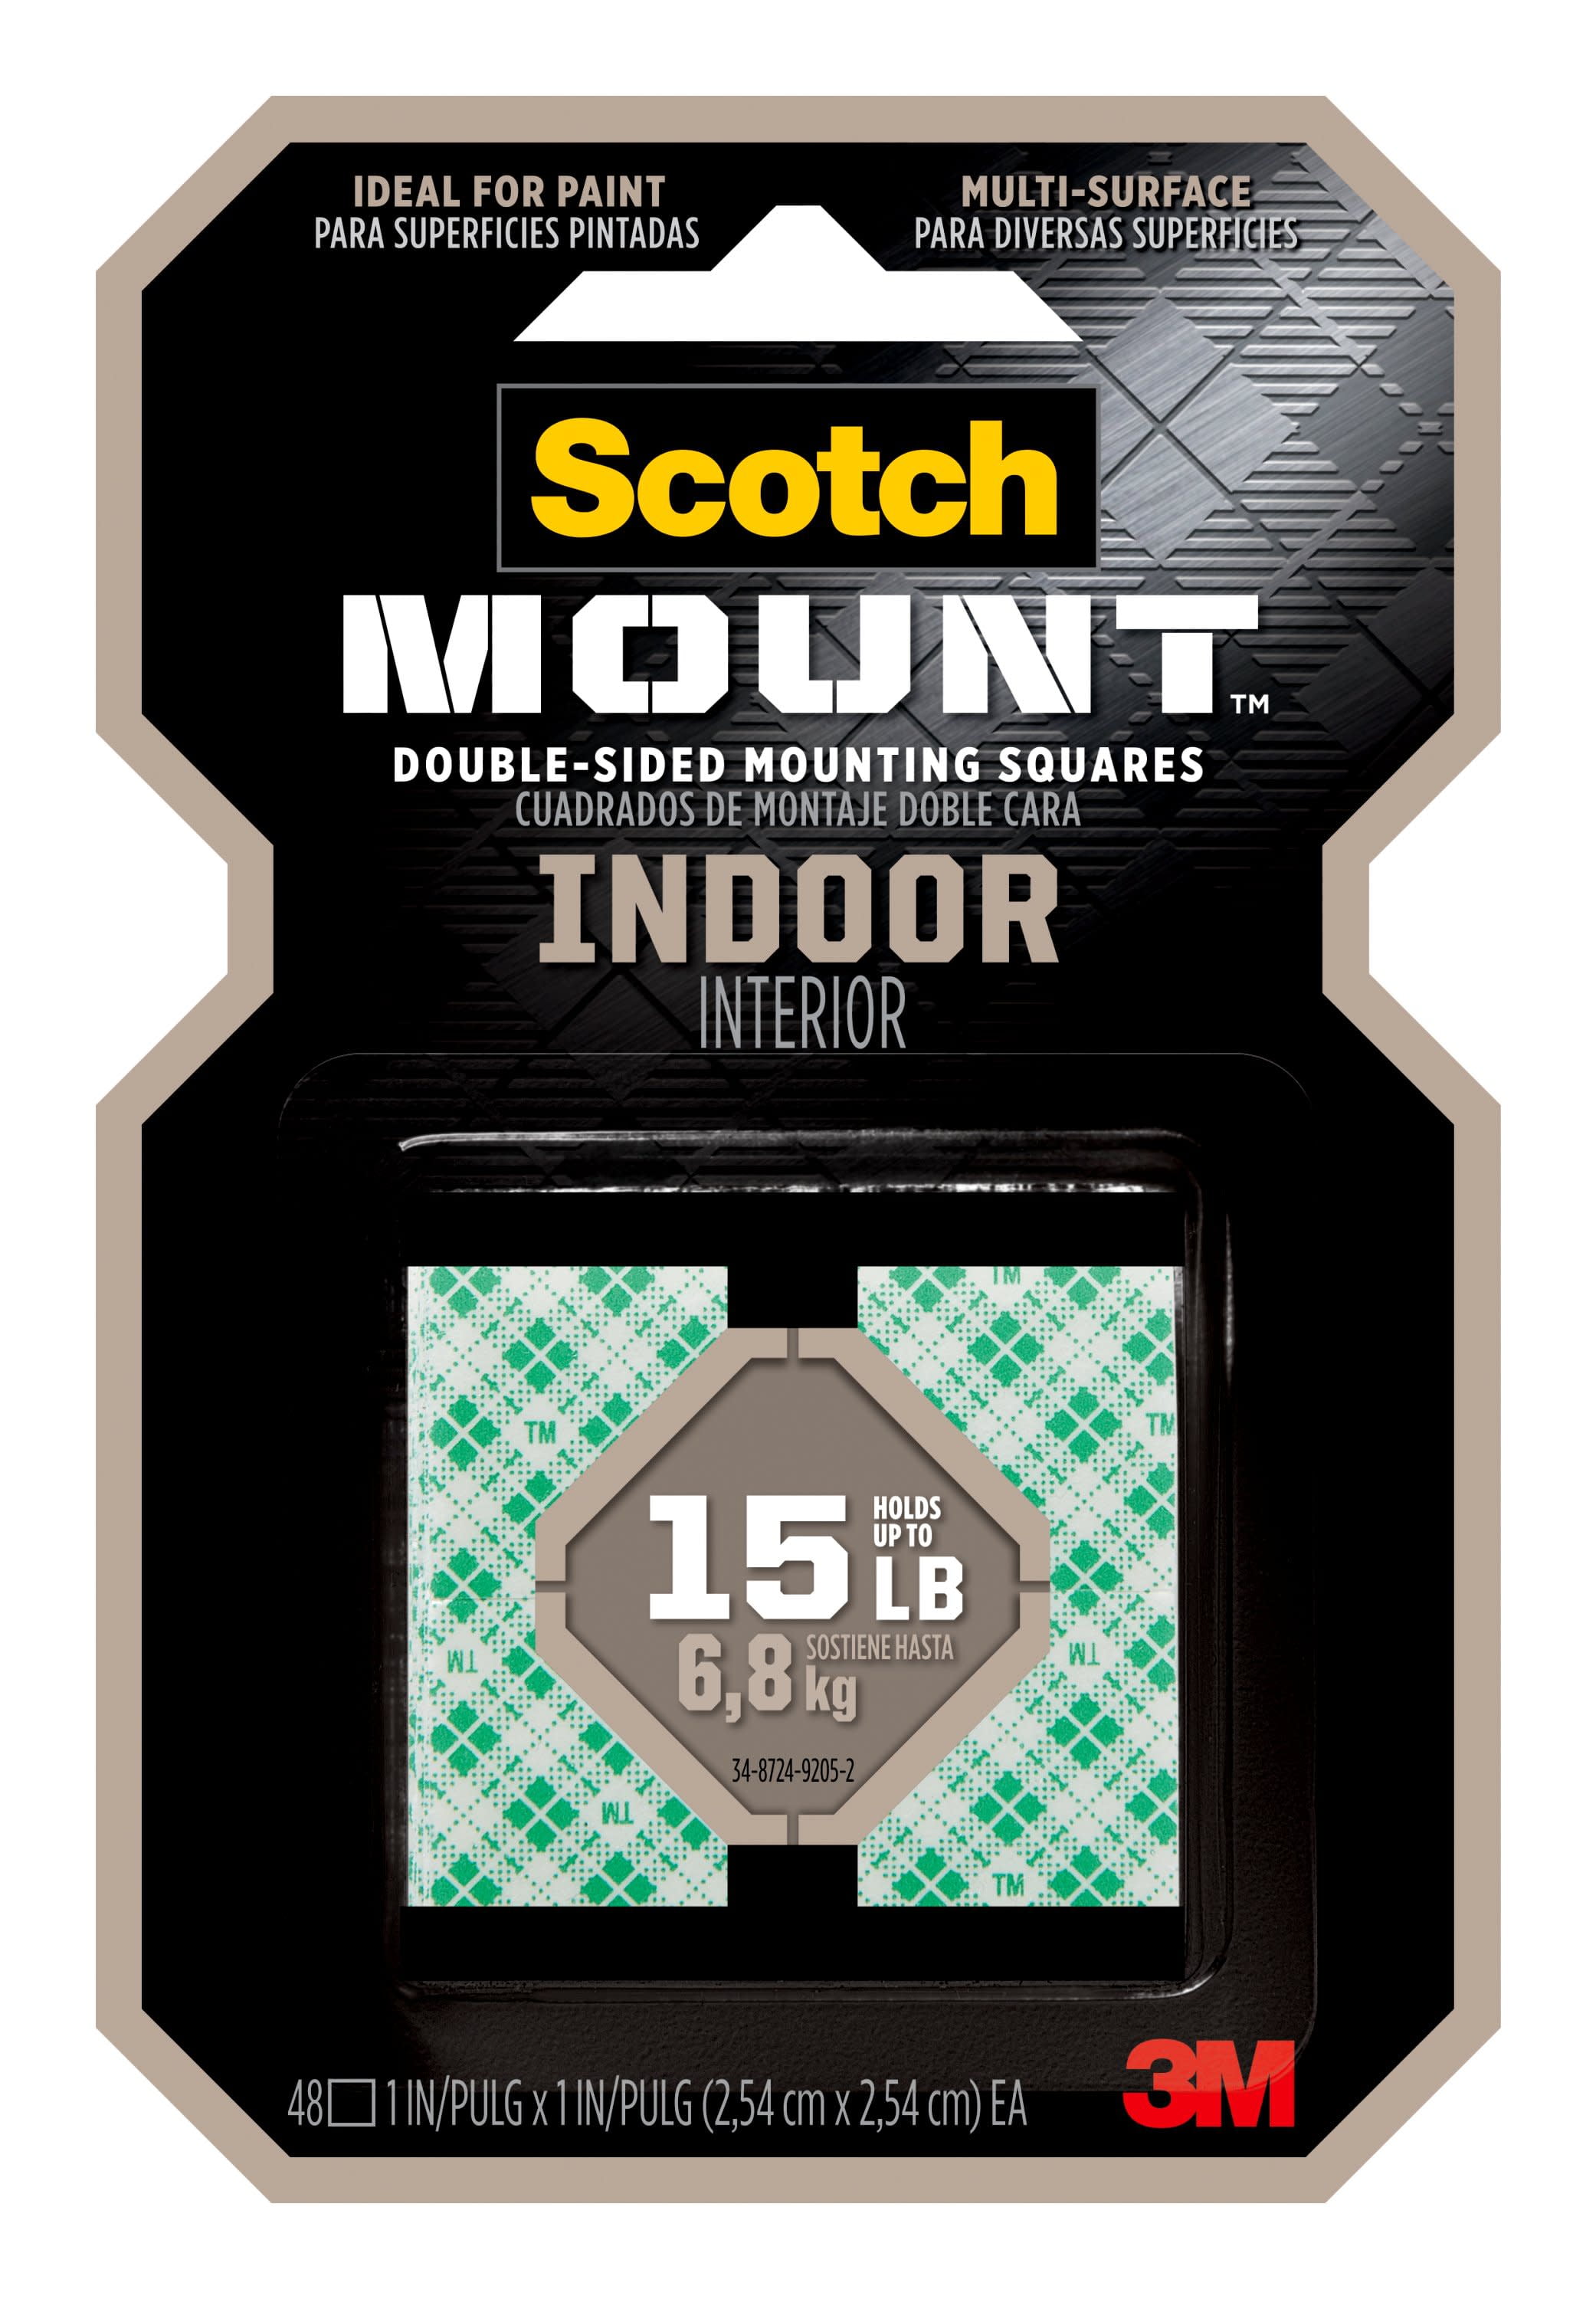 Scotch-Mount Indoor Double-Sided Mounting Squares, 1 in x 1 in, 48 Squares